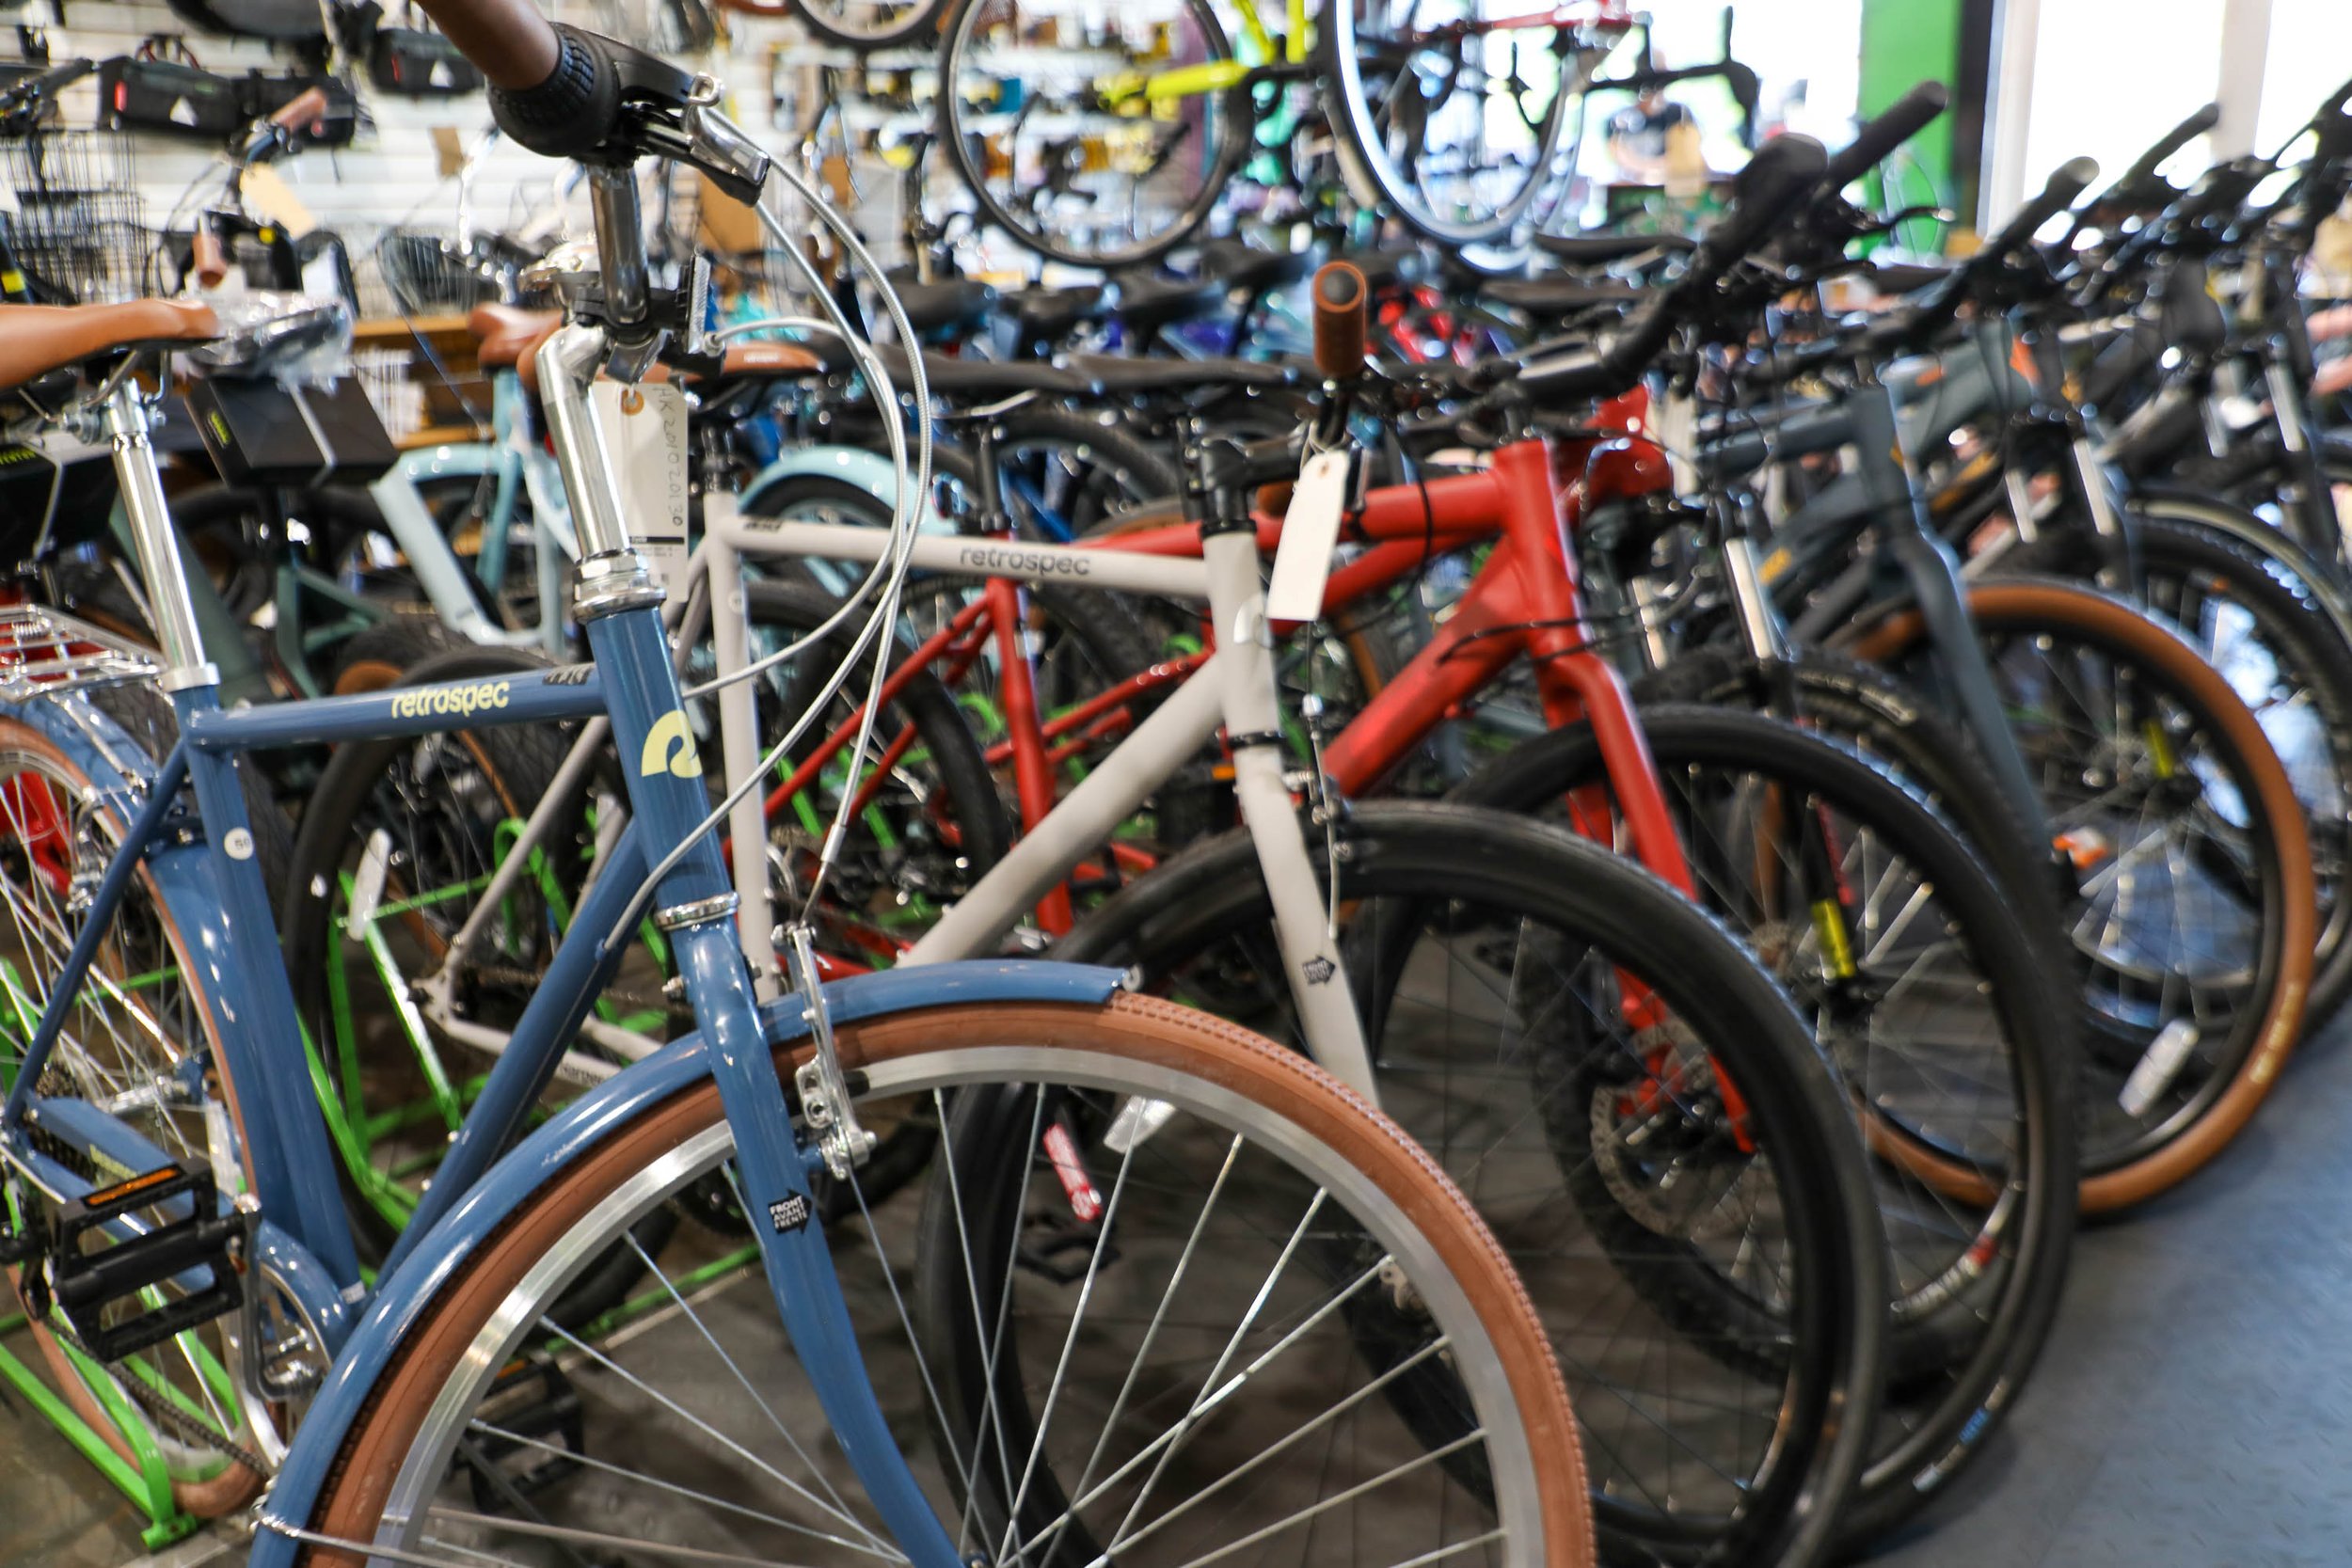 Key West Bikes For Sale — We Cycle